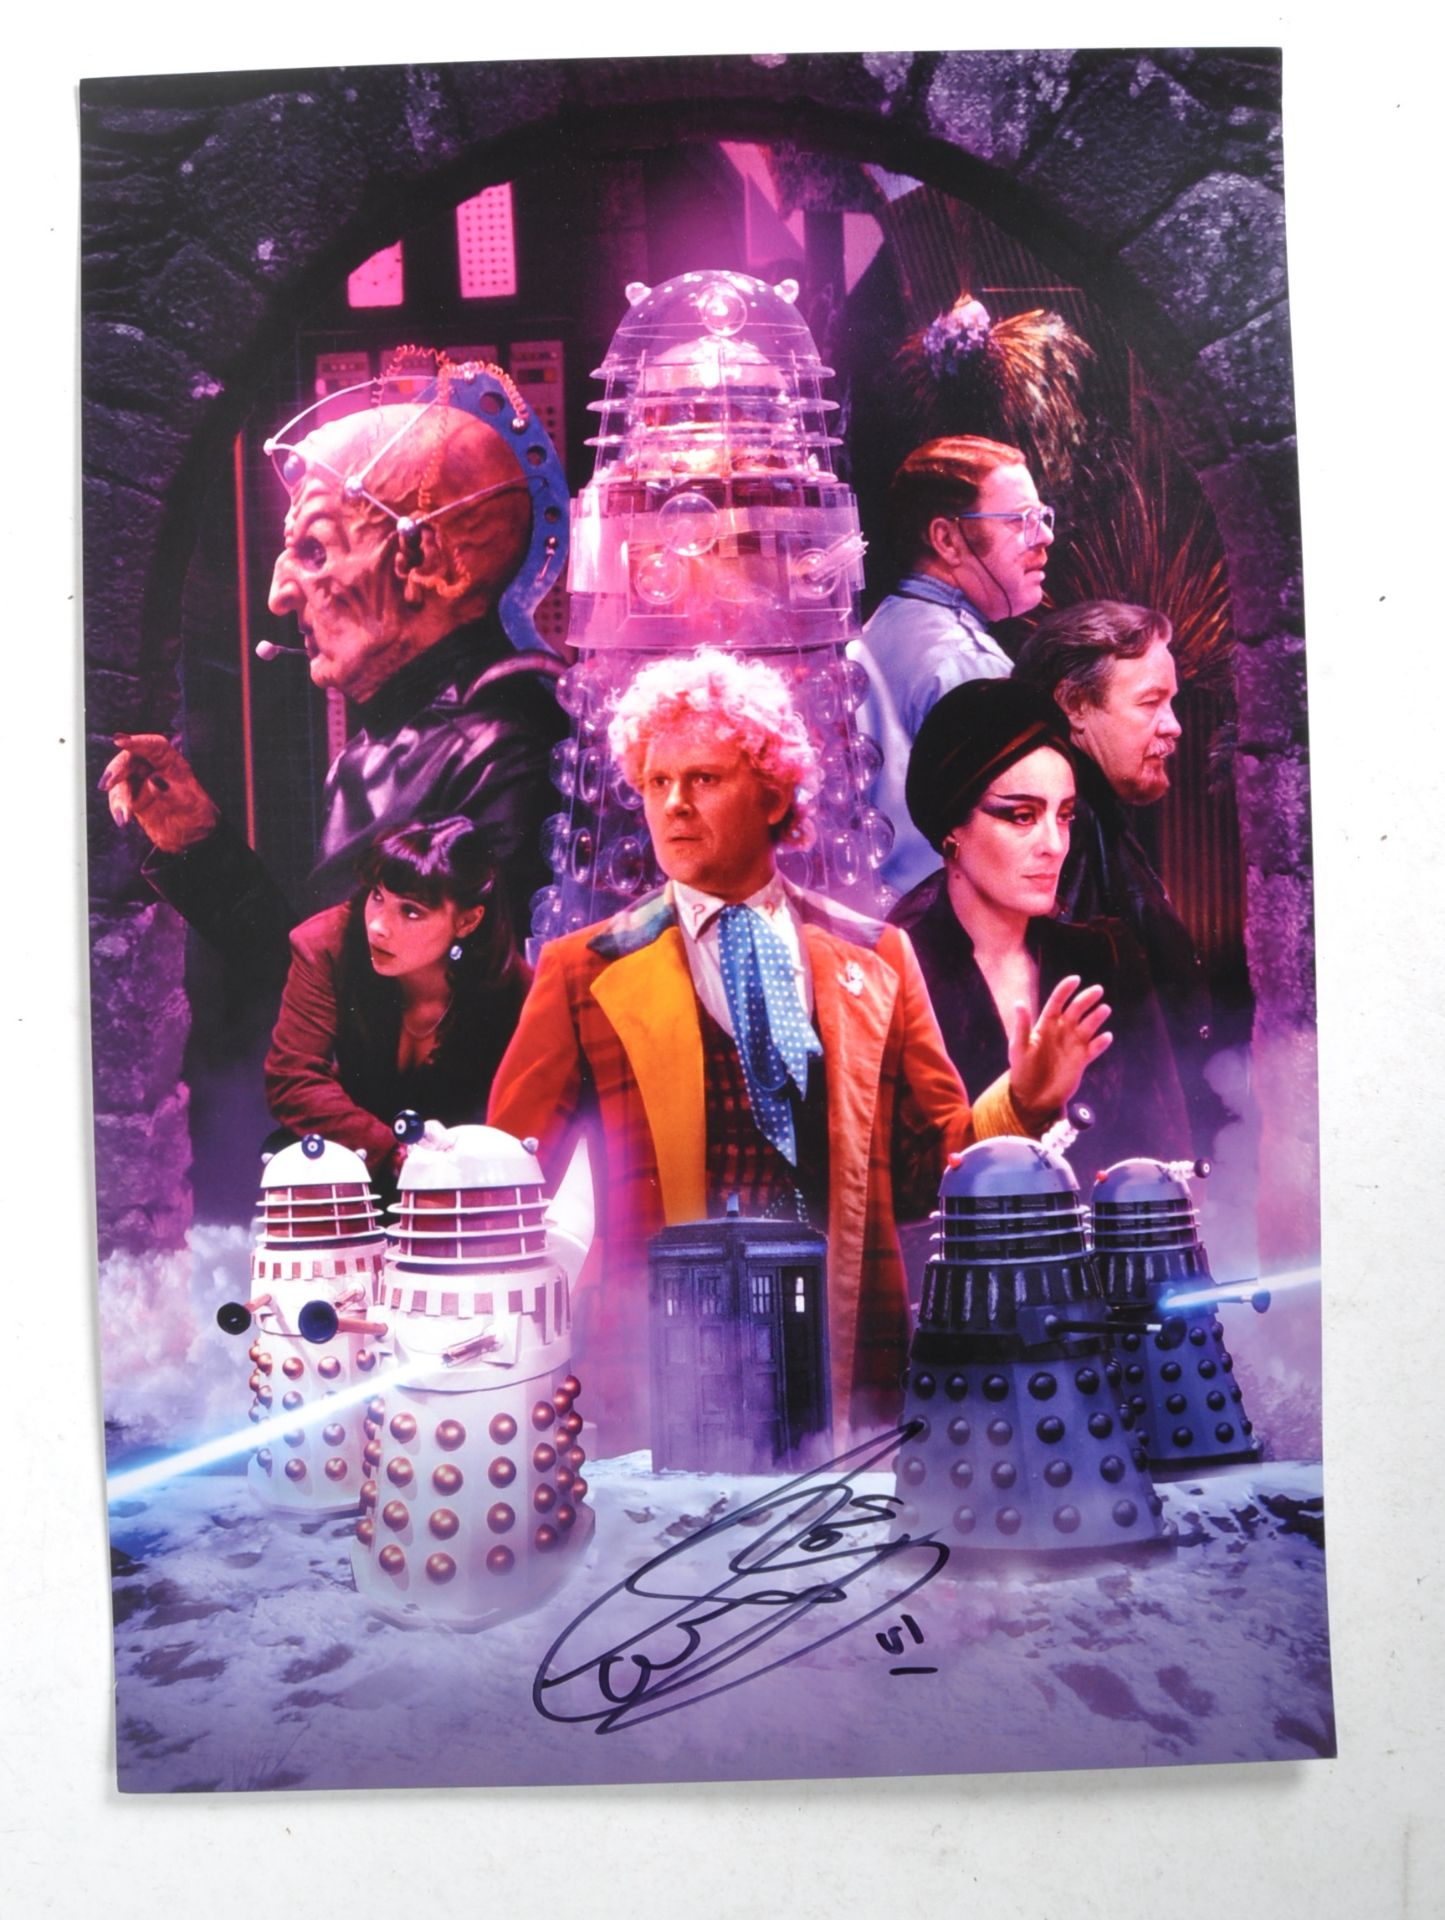 DOCTOR WHO - COLIN BAKER (SIXTH DR) - AUTOGRAPHED 16X12" POSTER - Image 3 of 3